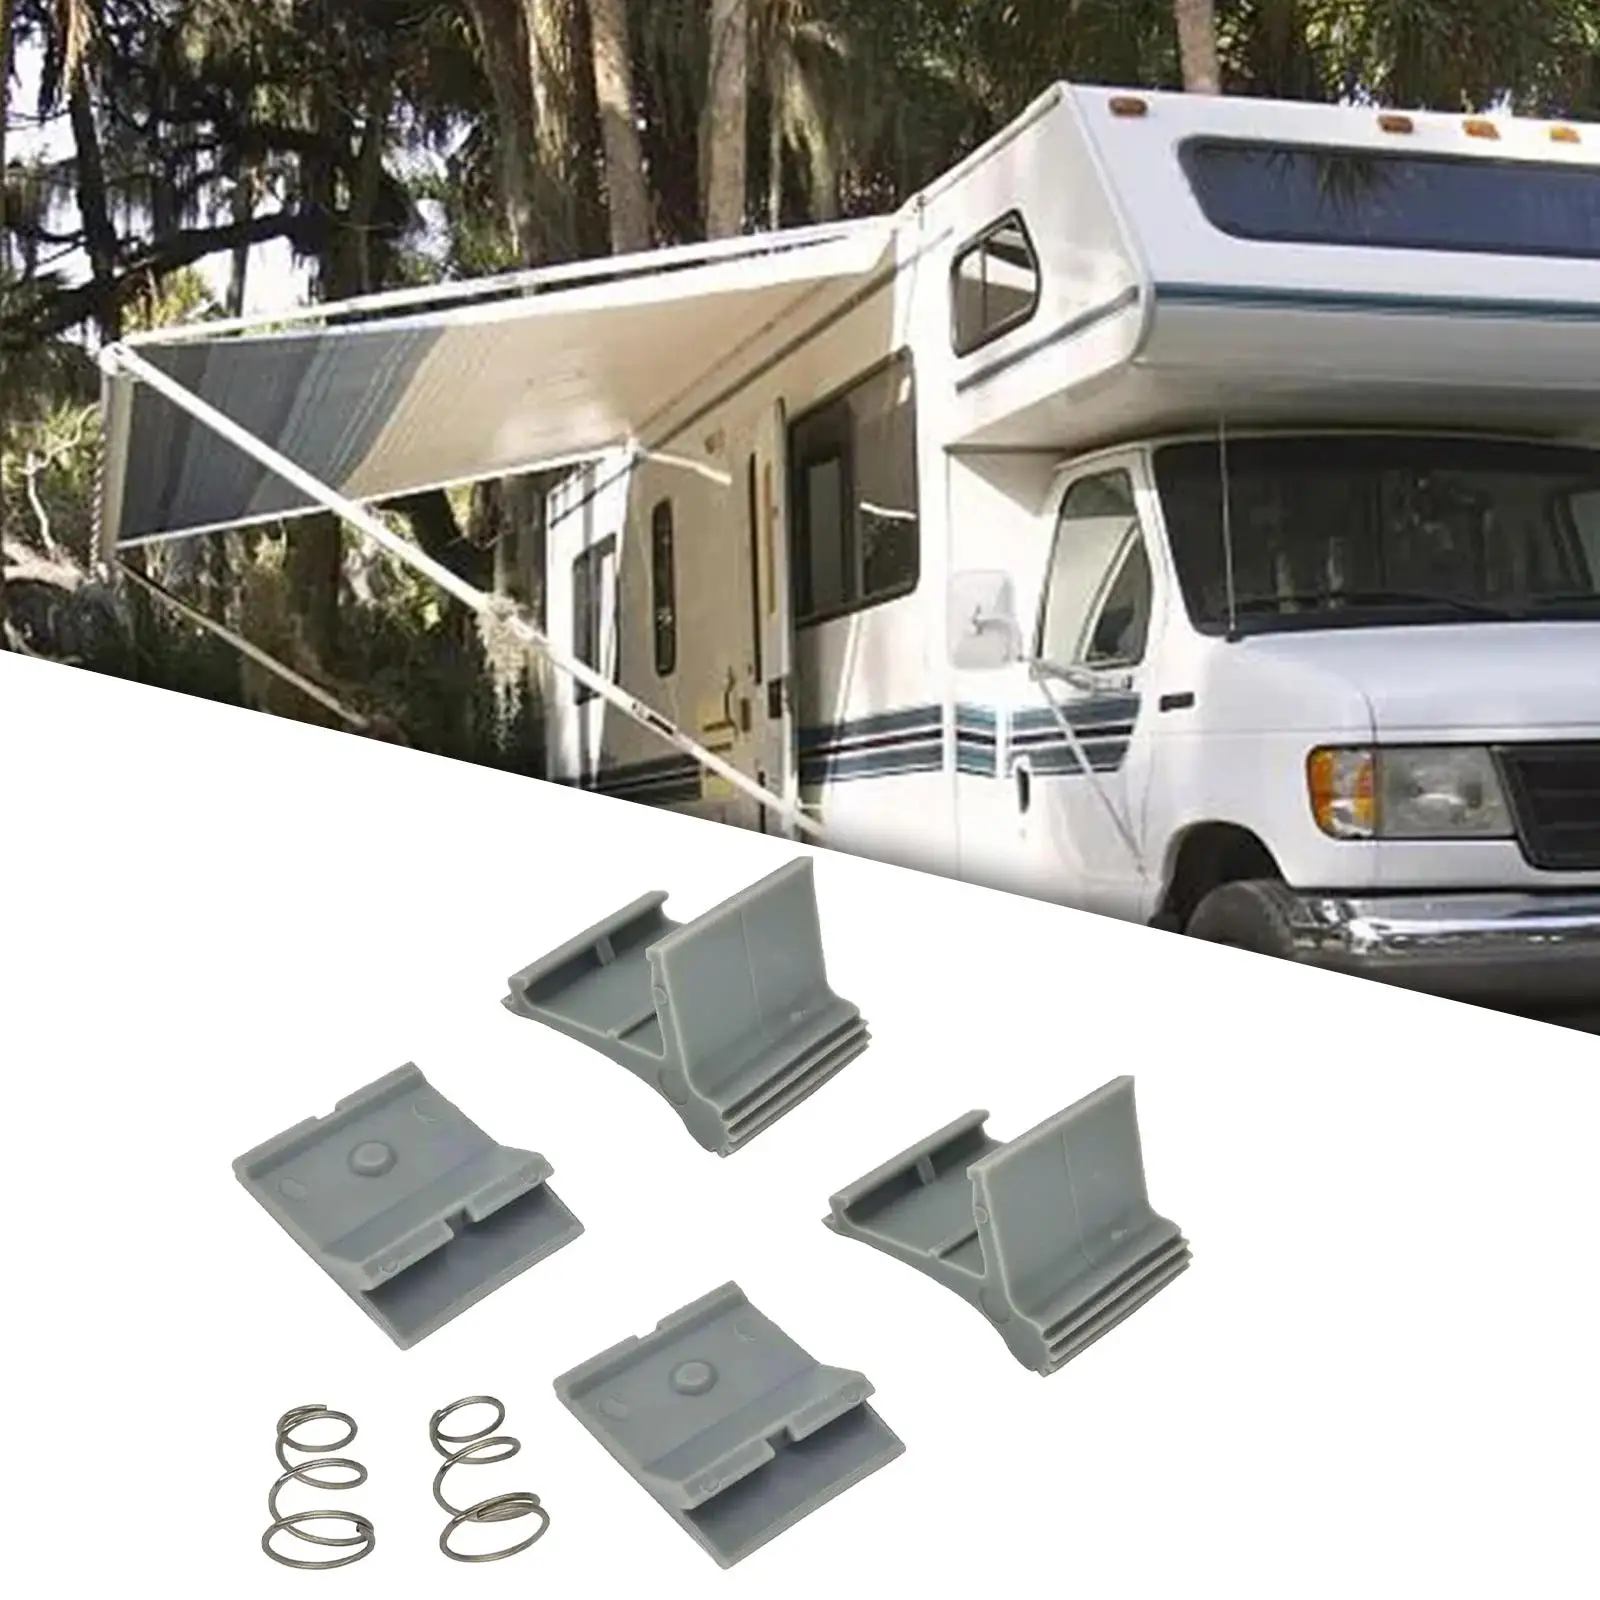 RV Awning Arm Slider Catch Set Replaces for Motorhome Camper Trailer